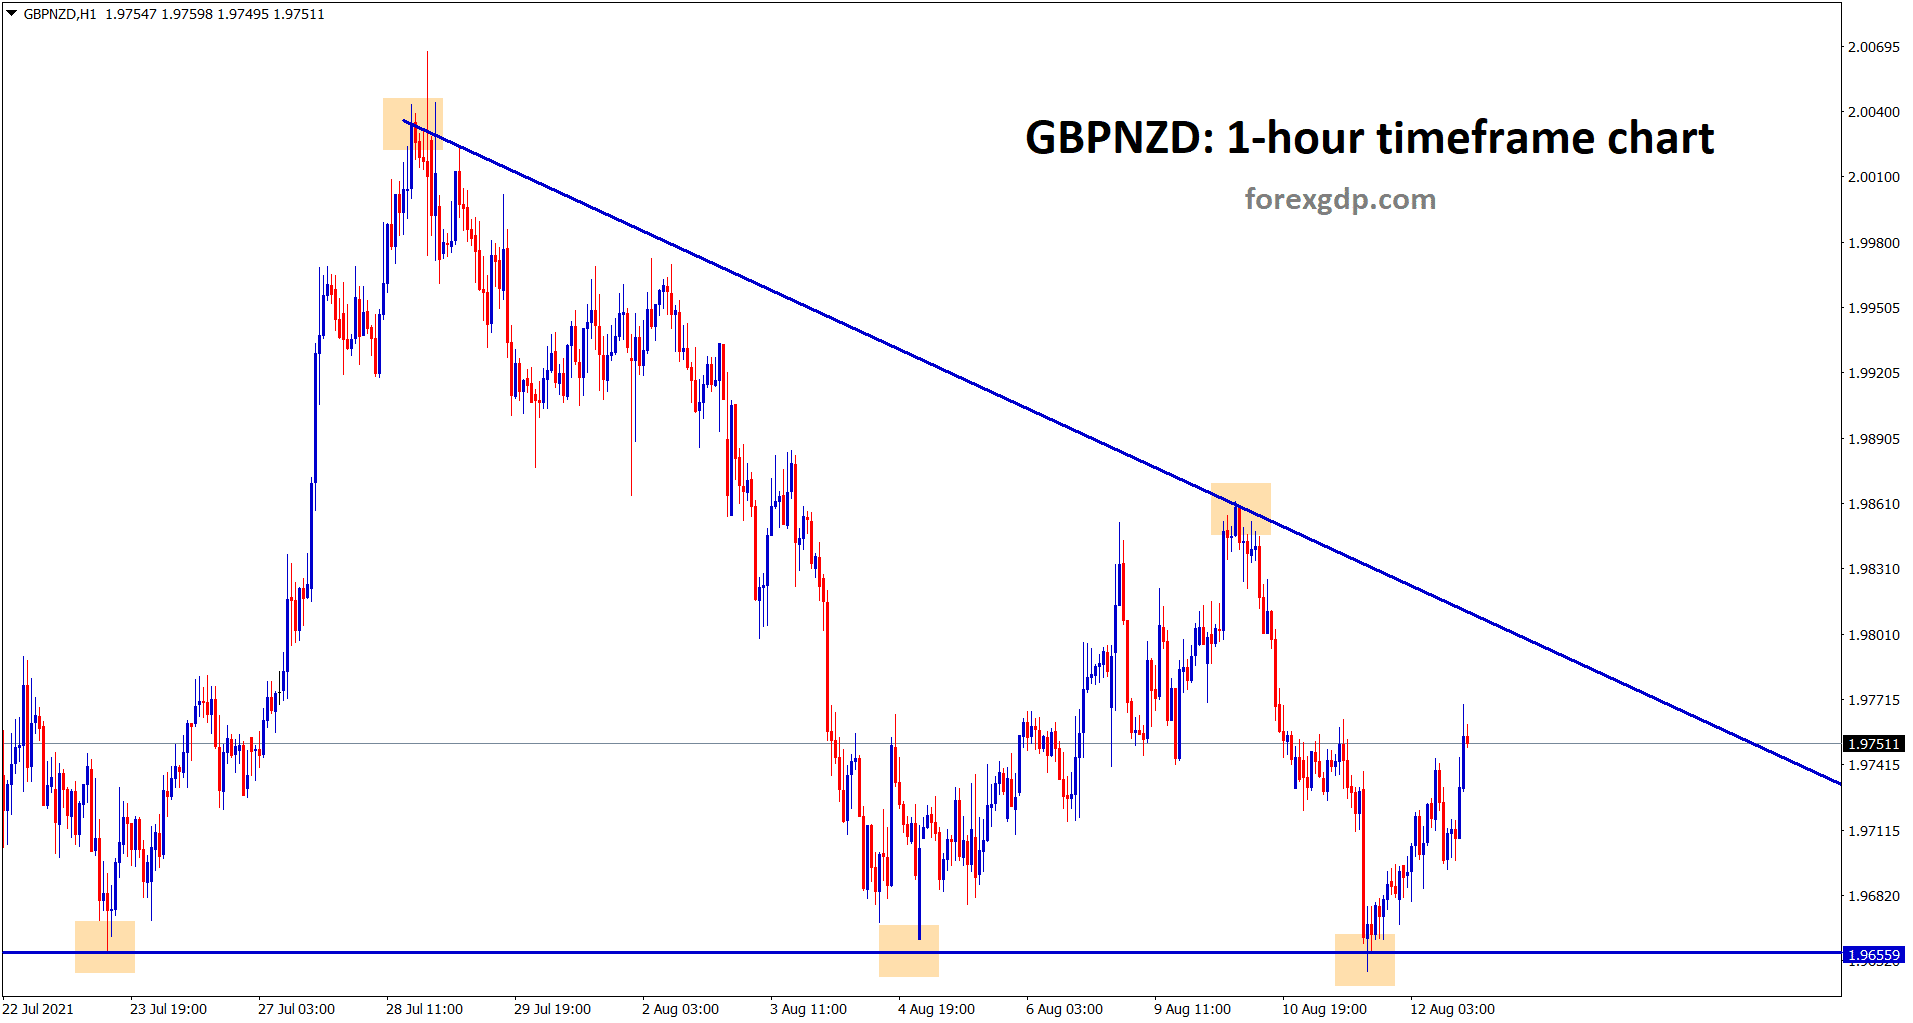 GBPNZD has formed a descending triangle pattern same as GBPAUD in the hourly chart